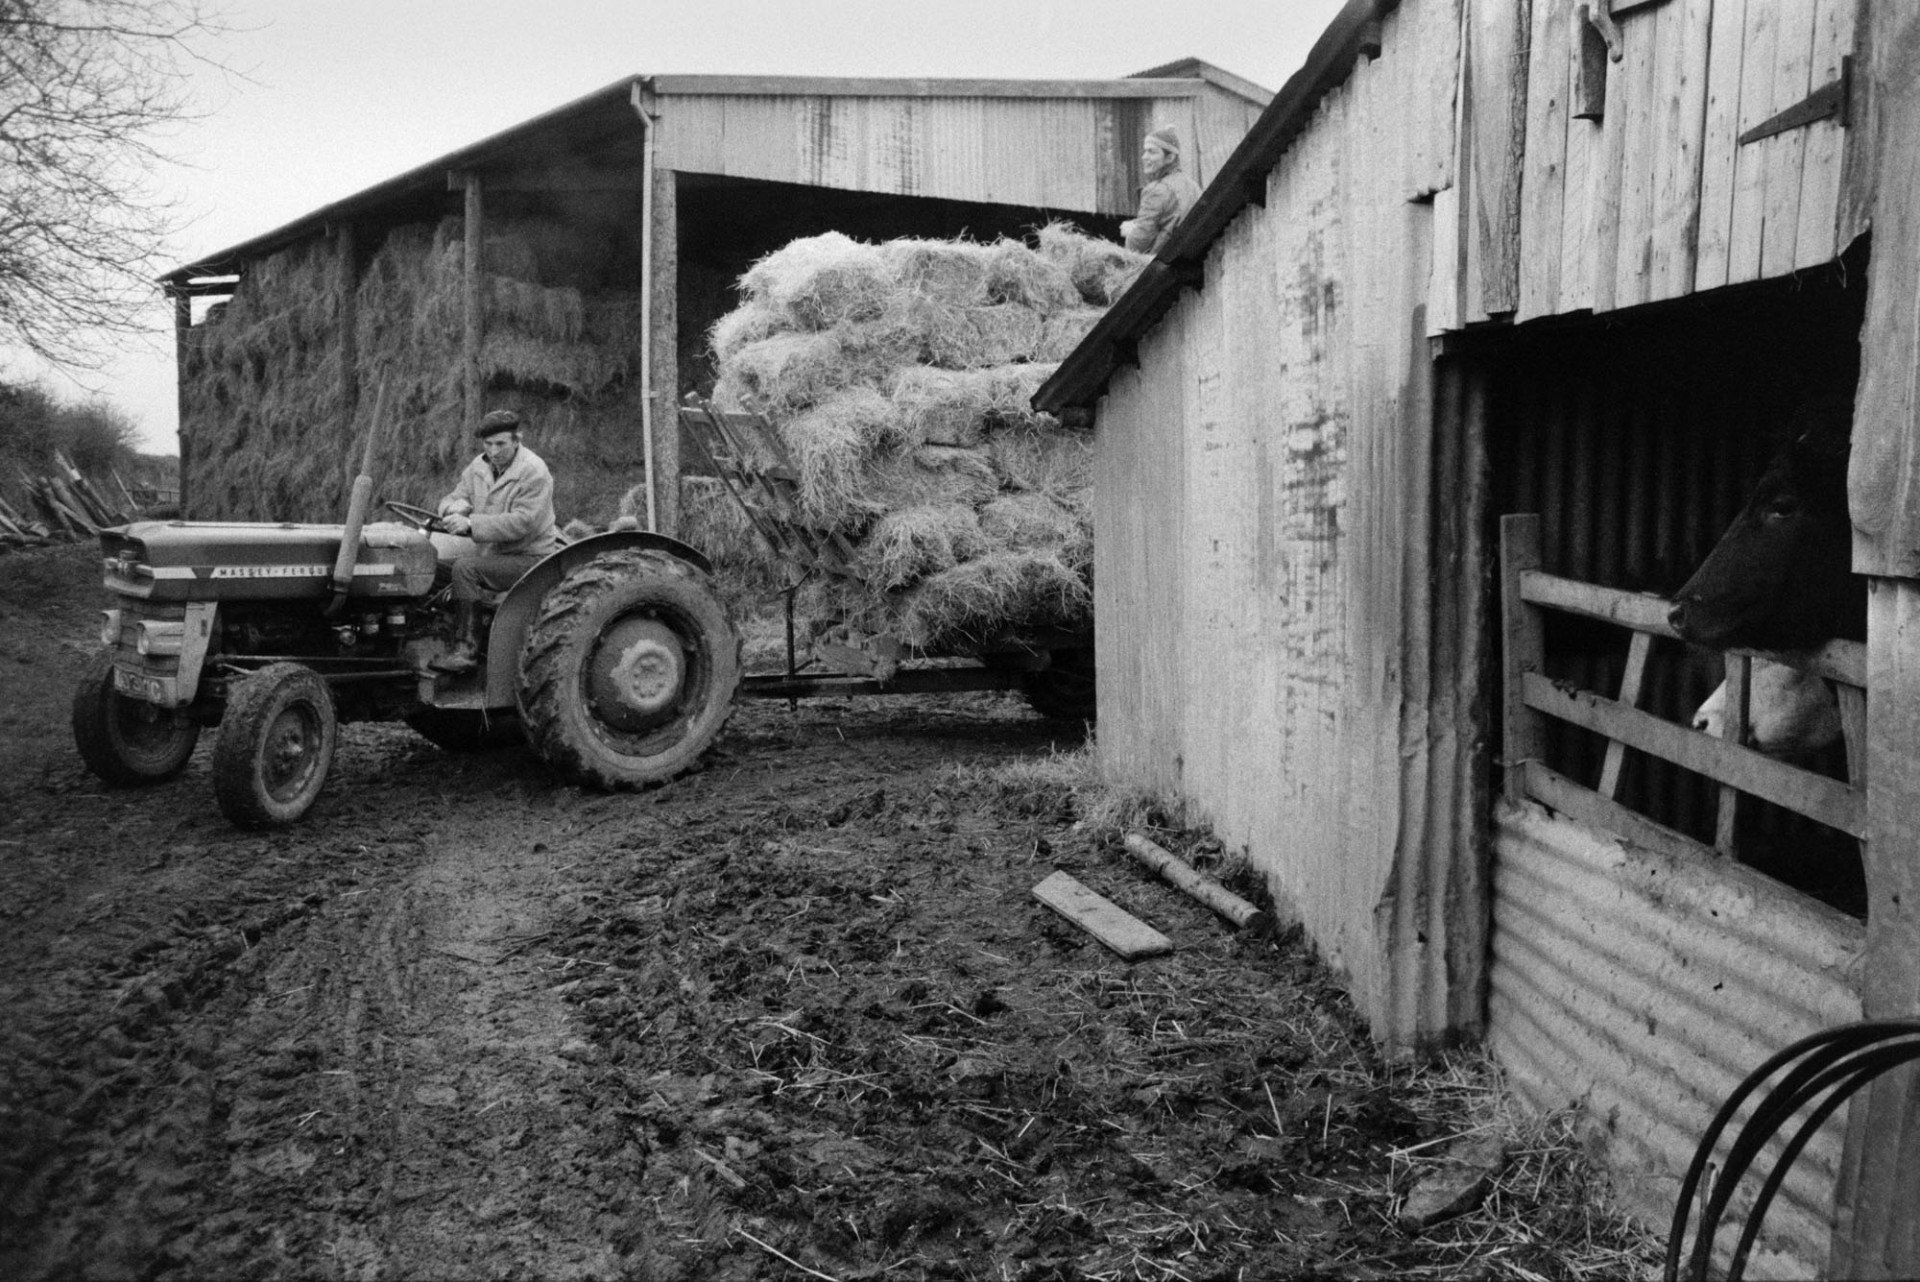 Ivor Bourne driving a tractor and trailer with hay bales to a cattle shed at Mill Road Farm, Beaford. A barn with hay bales is visible in the background and a cow looking over a gate to a barn can be seen in the foreground. The farm was also known as Jeffrys.